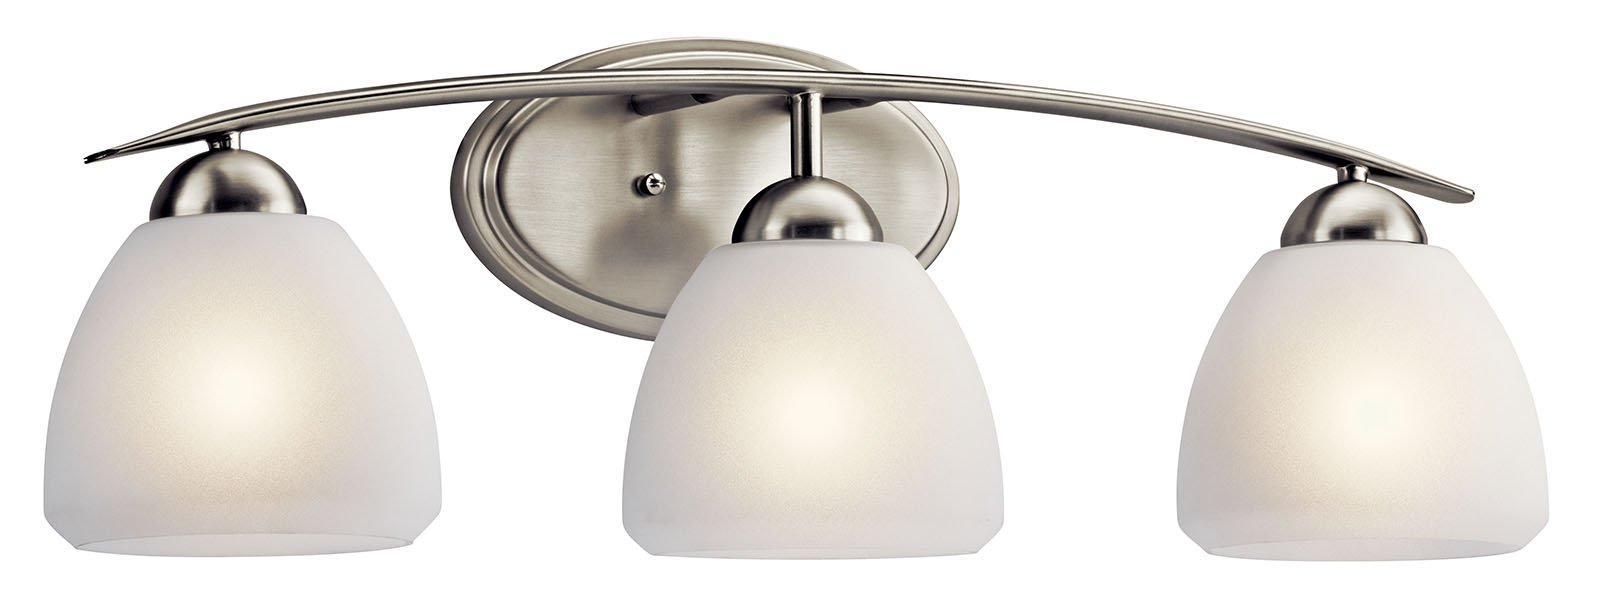 This 3 light bath light from the Kichler Calleigh(TM) Collection features satin etched goblets of cased opal glass balancing on an arched and tapered arm in Brushed Nickel providing a clean, crisp contemporary flair. May be installed with the glass up or down.